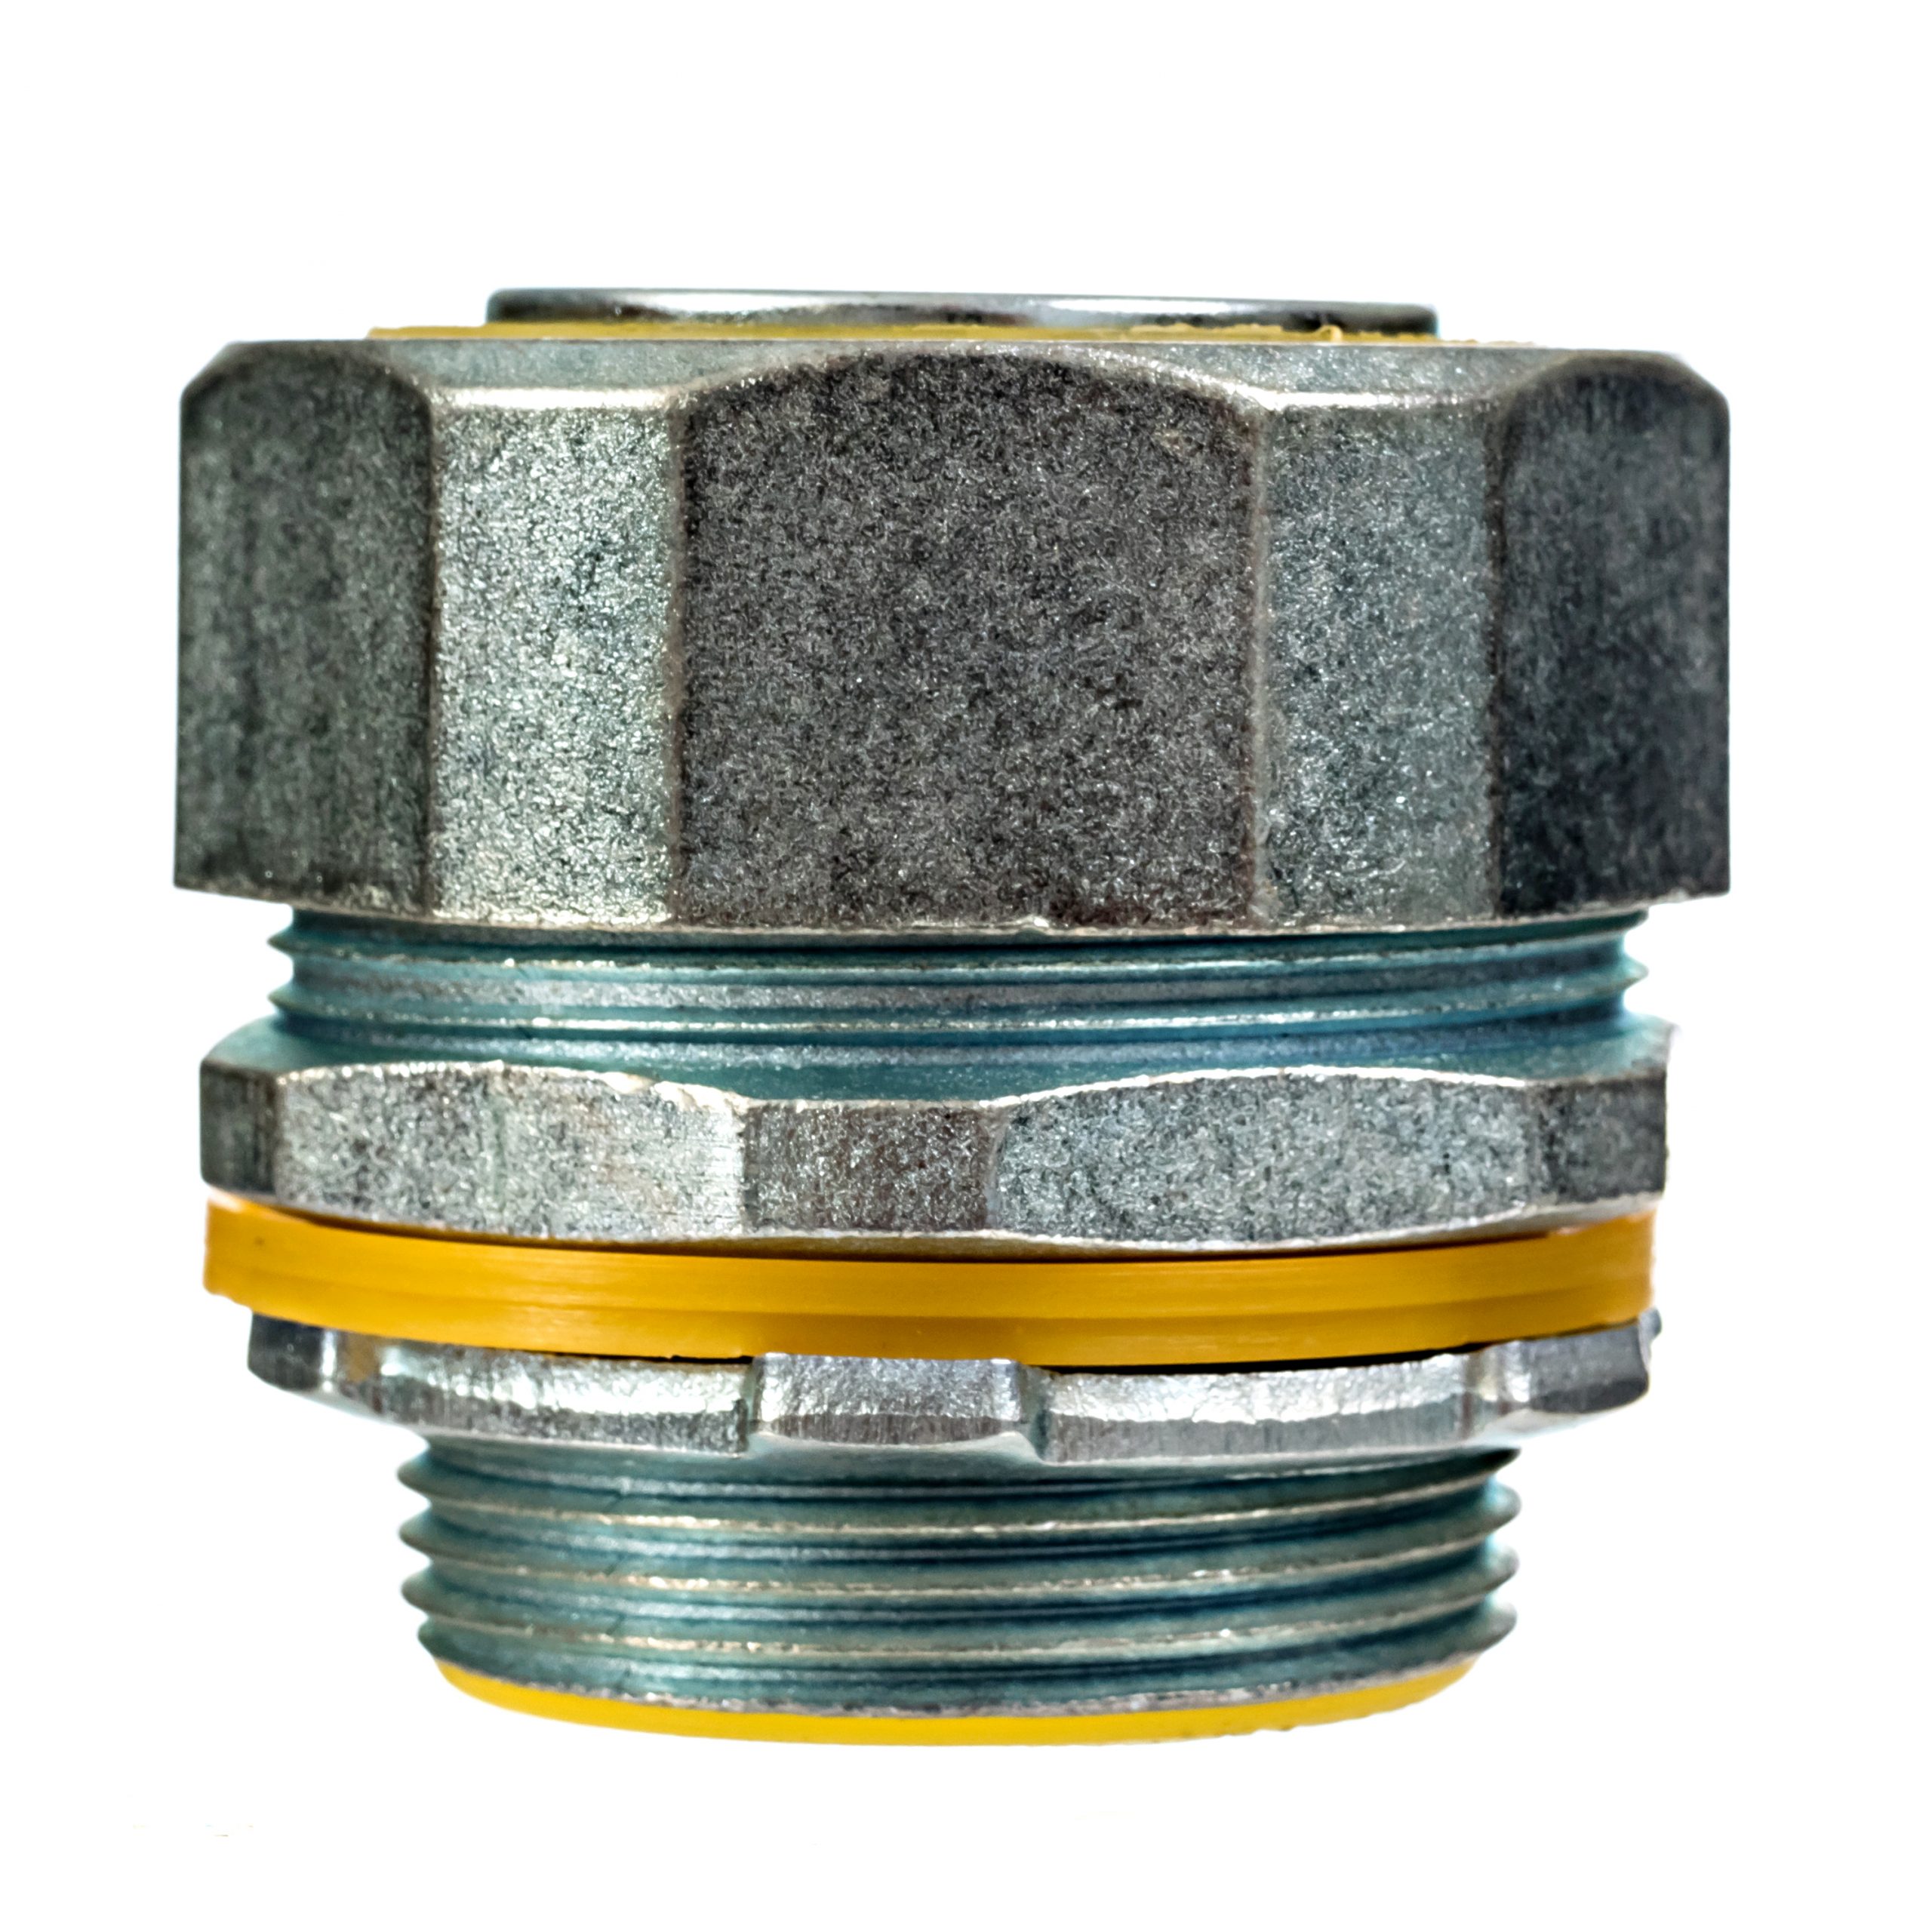 Appleton CG137125 :: Liquidtight Strain Relief Cord and Cable Connector,  1-1/4 Hub, Cable Range 1.375 - 1.500 :: PLATT ELECTRIC SUPPLY